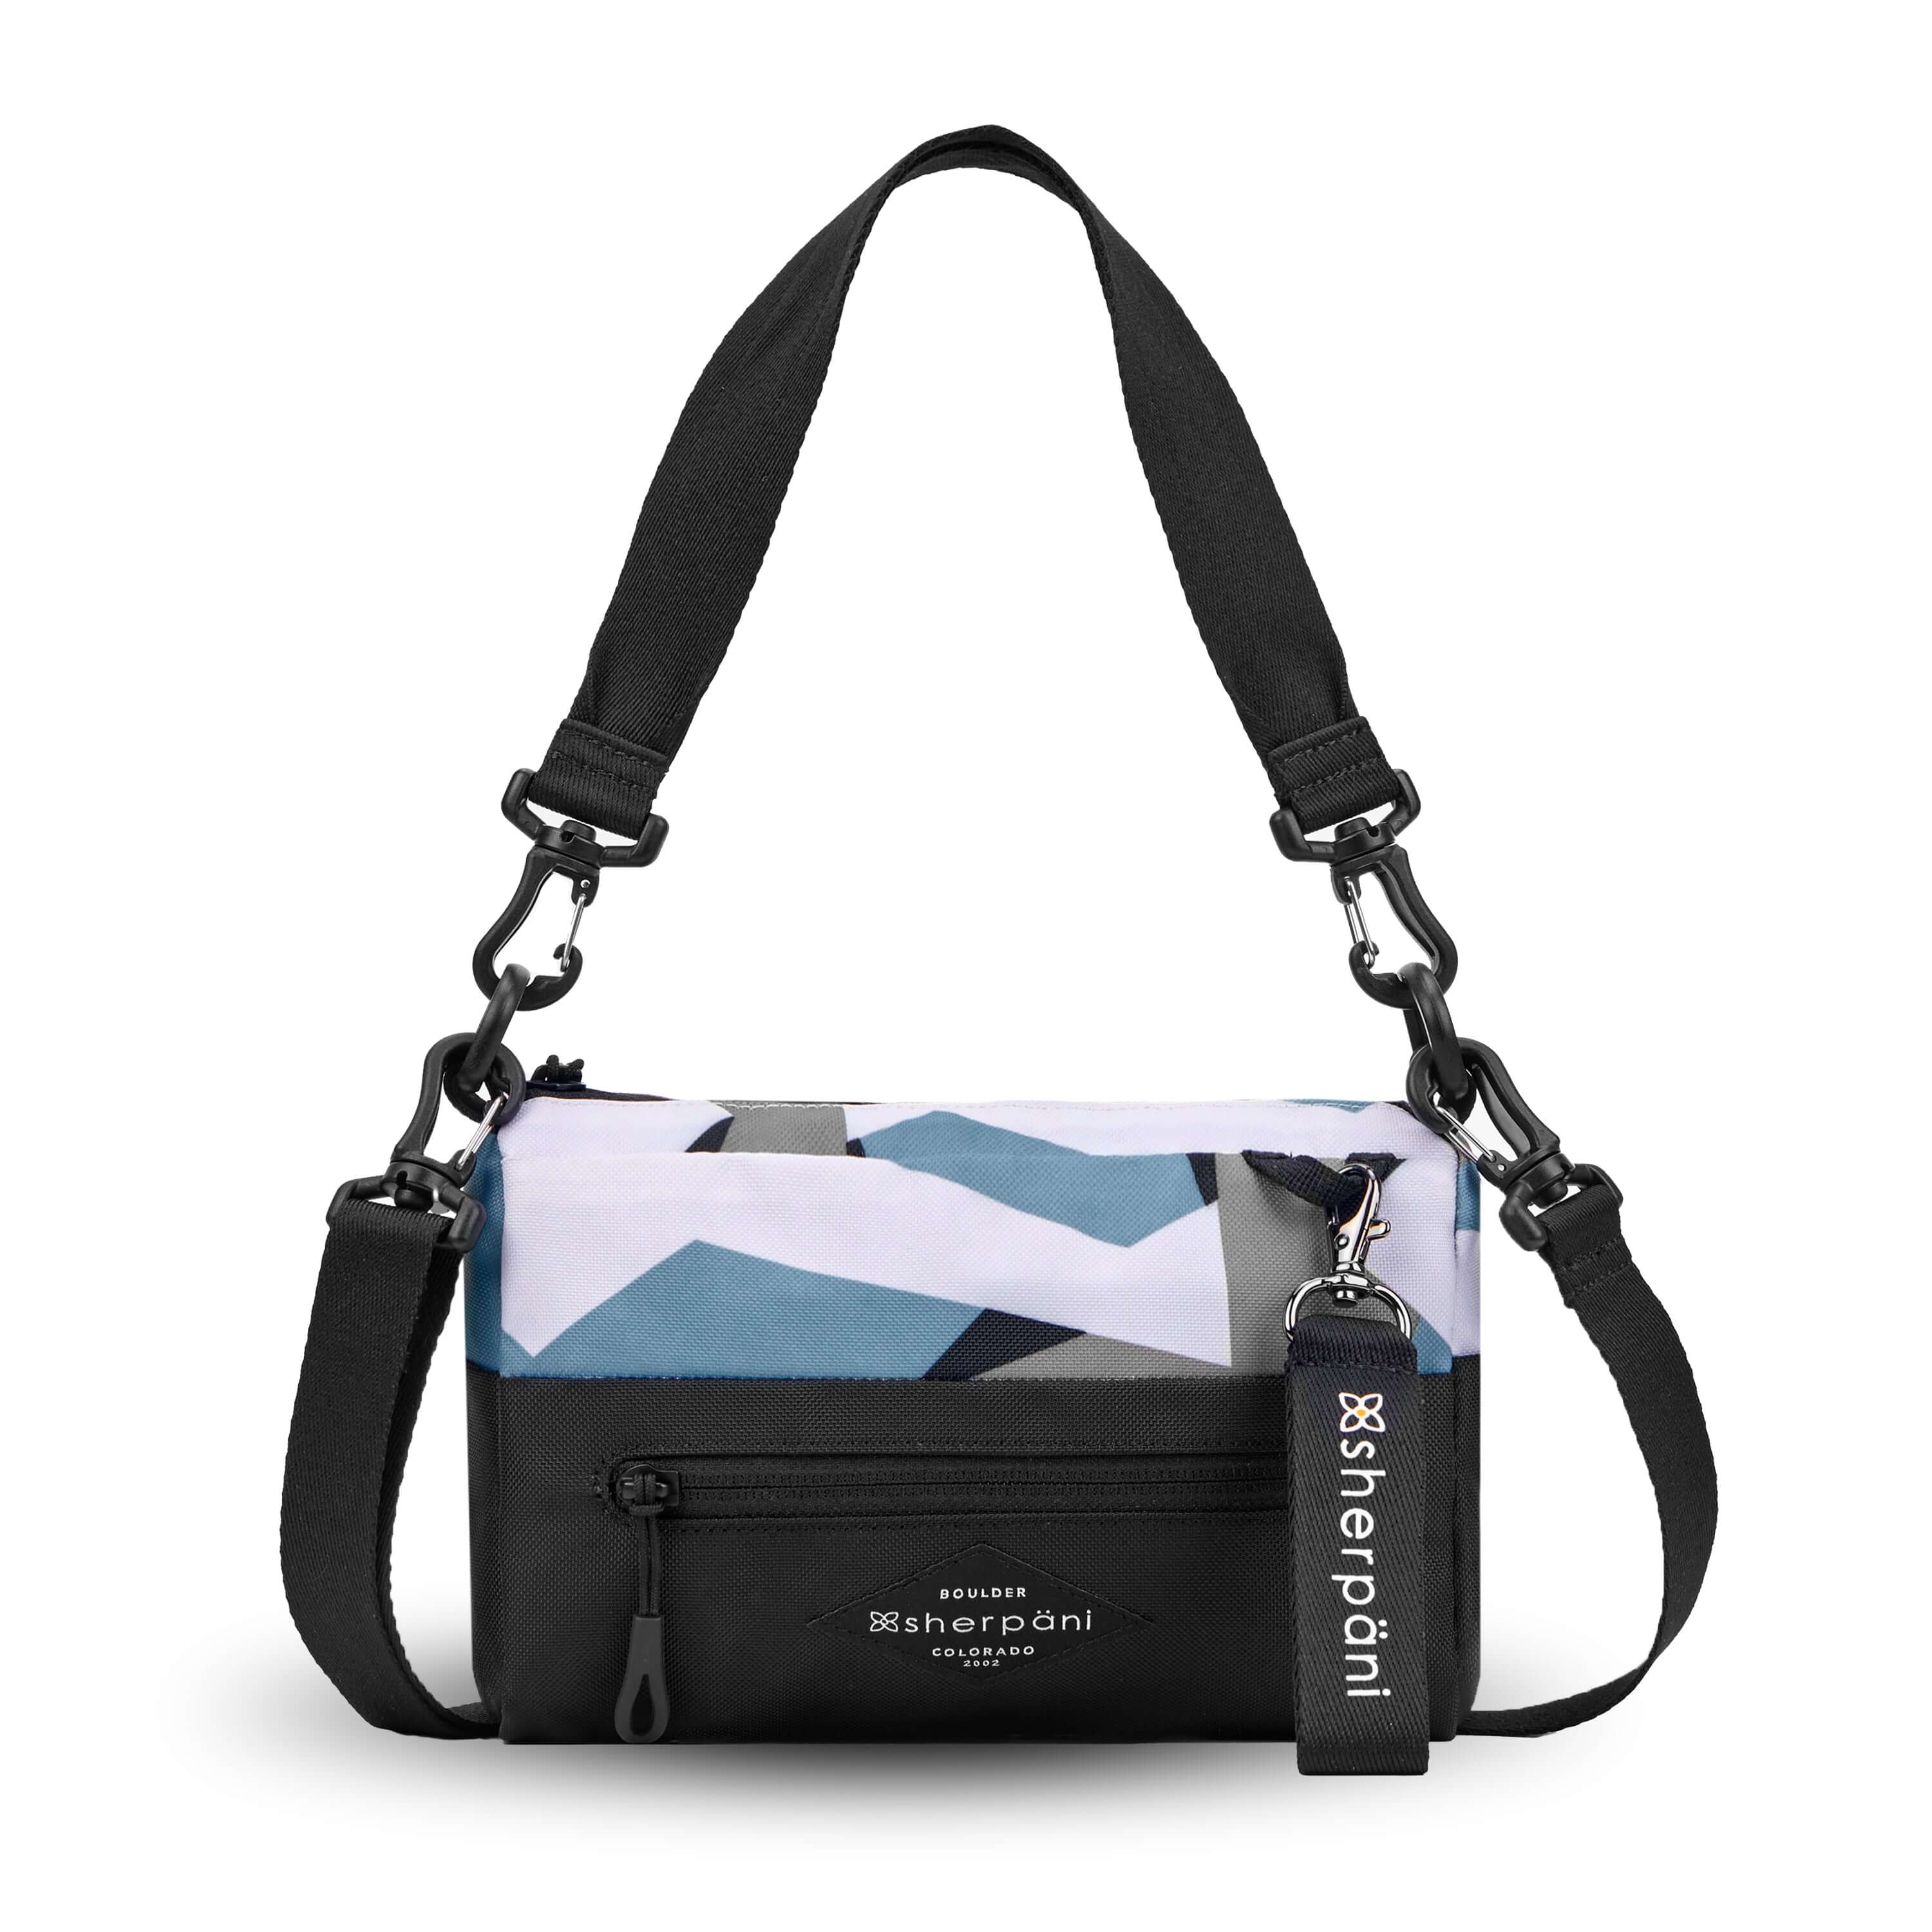 Flat front view of Sherpani's purse, the Skye in Summer Camo. It is two toned, the top half of the bag is a camouflage pattern of white, gray and blue and the bottom half of the bag is black. There is an external zipper compartment with an easy pull zipper accented in black. There is a branded Sherpani keychain clipped to the upper right corner. The bag has a detachable short strap and a longer detachable/adjustable crossbody strap. 